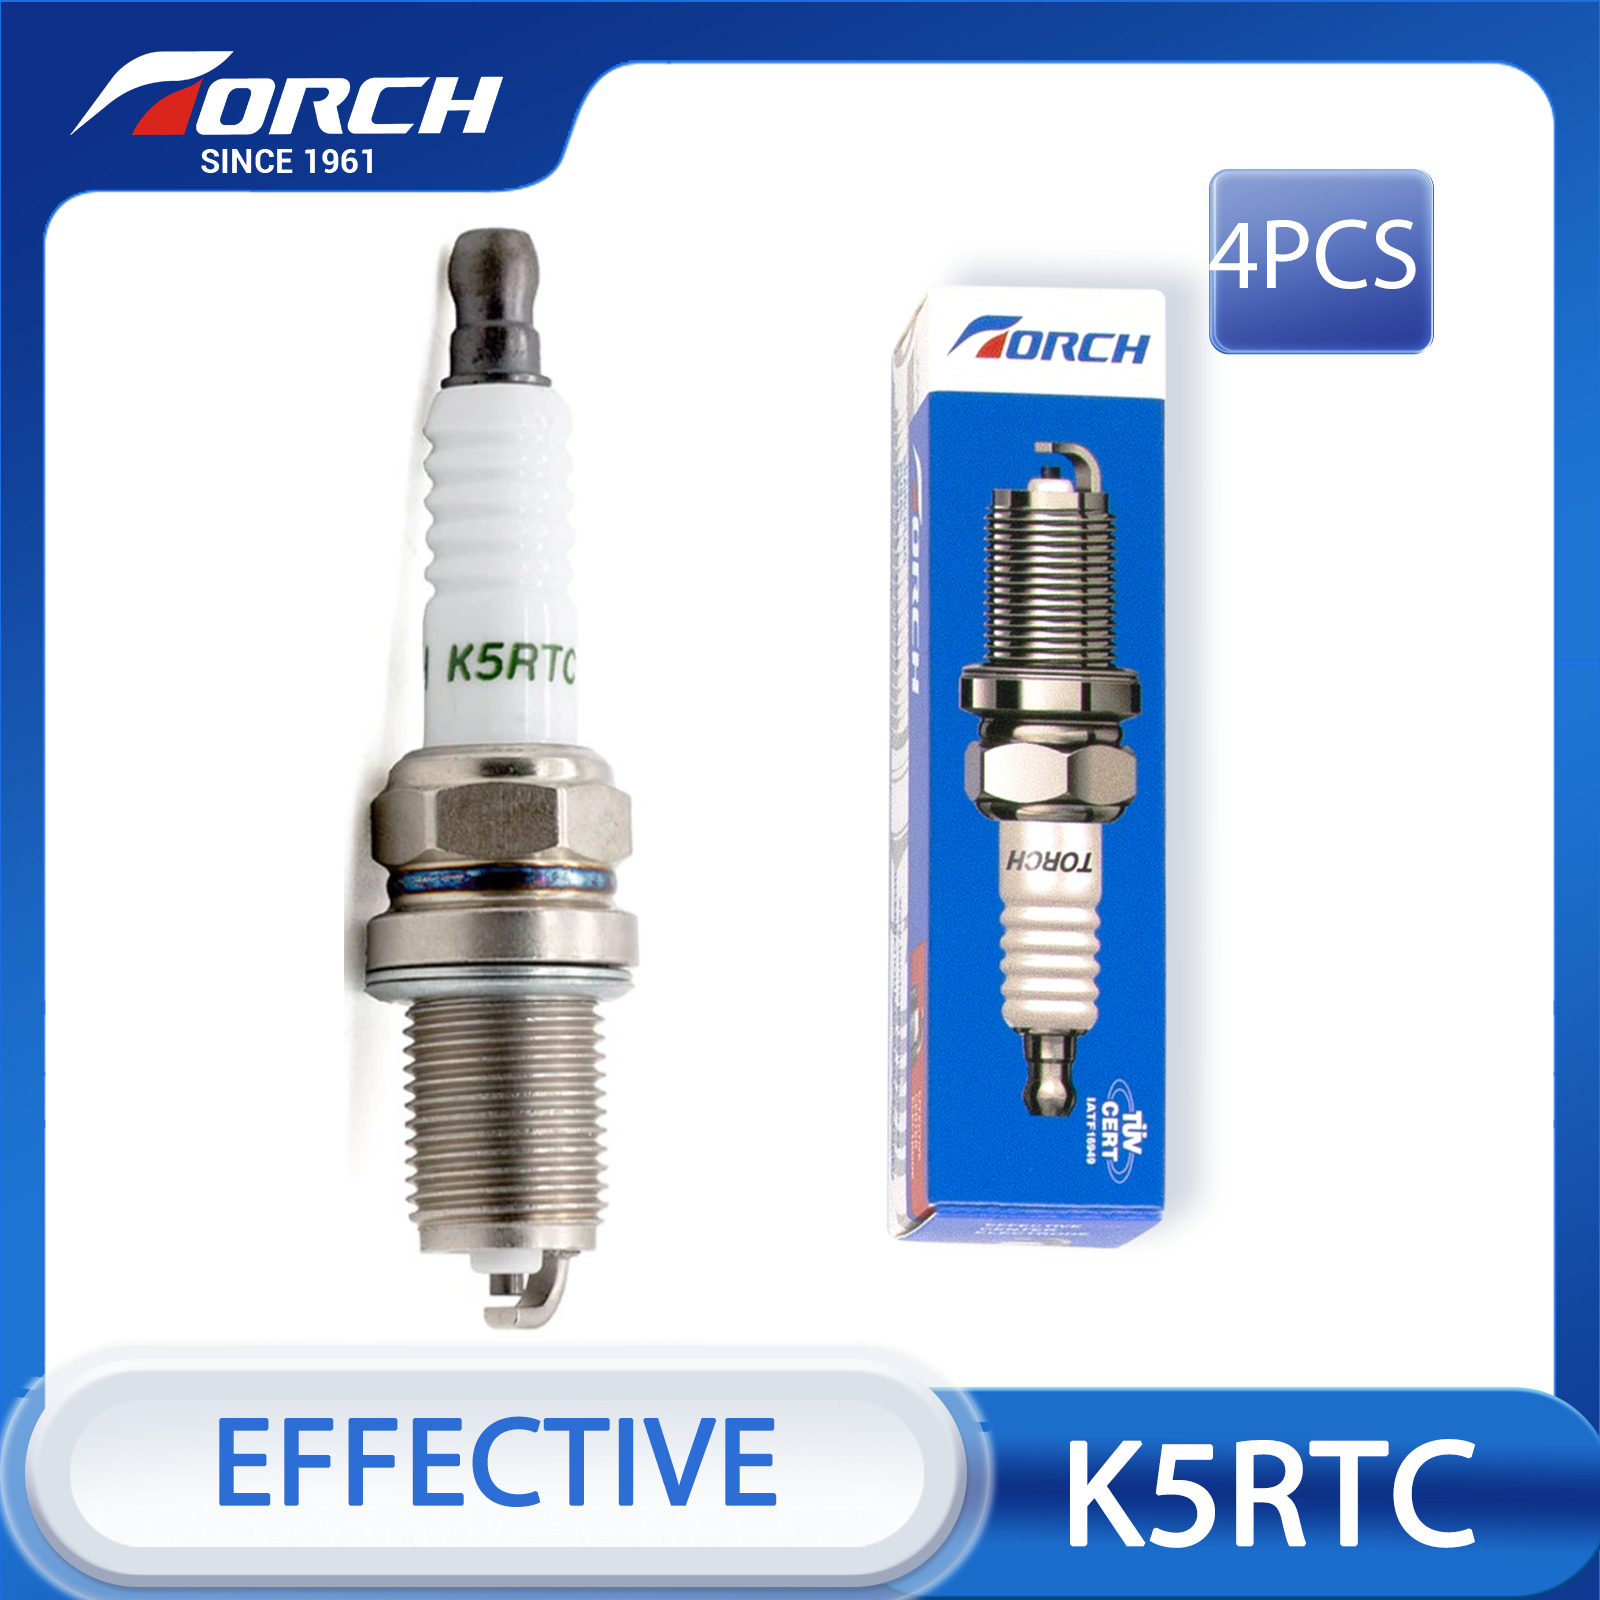 4Pieces TORCH K5RTC Spark Plug M14x1.25 Replacement for Denso K16PR-U F8DCOR